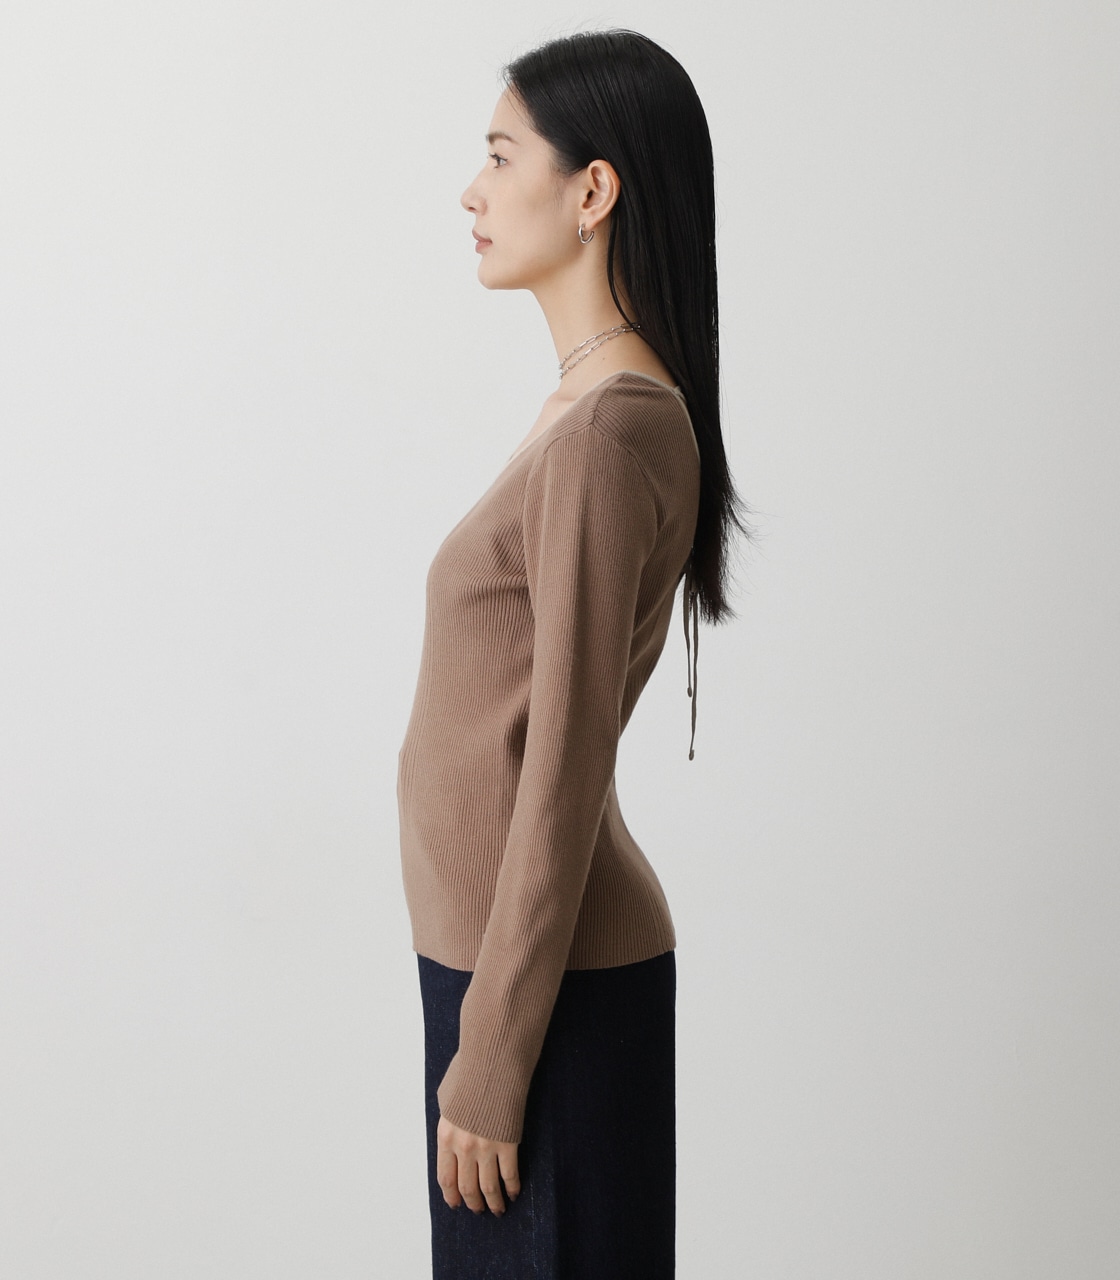 BACK LACE-UP KNIT TOPS/バックレースアップニットトップス 詳細画像 L/BRN 6